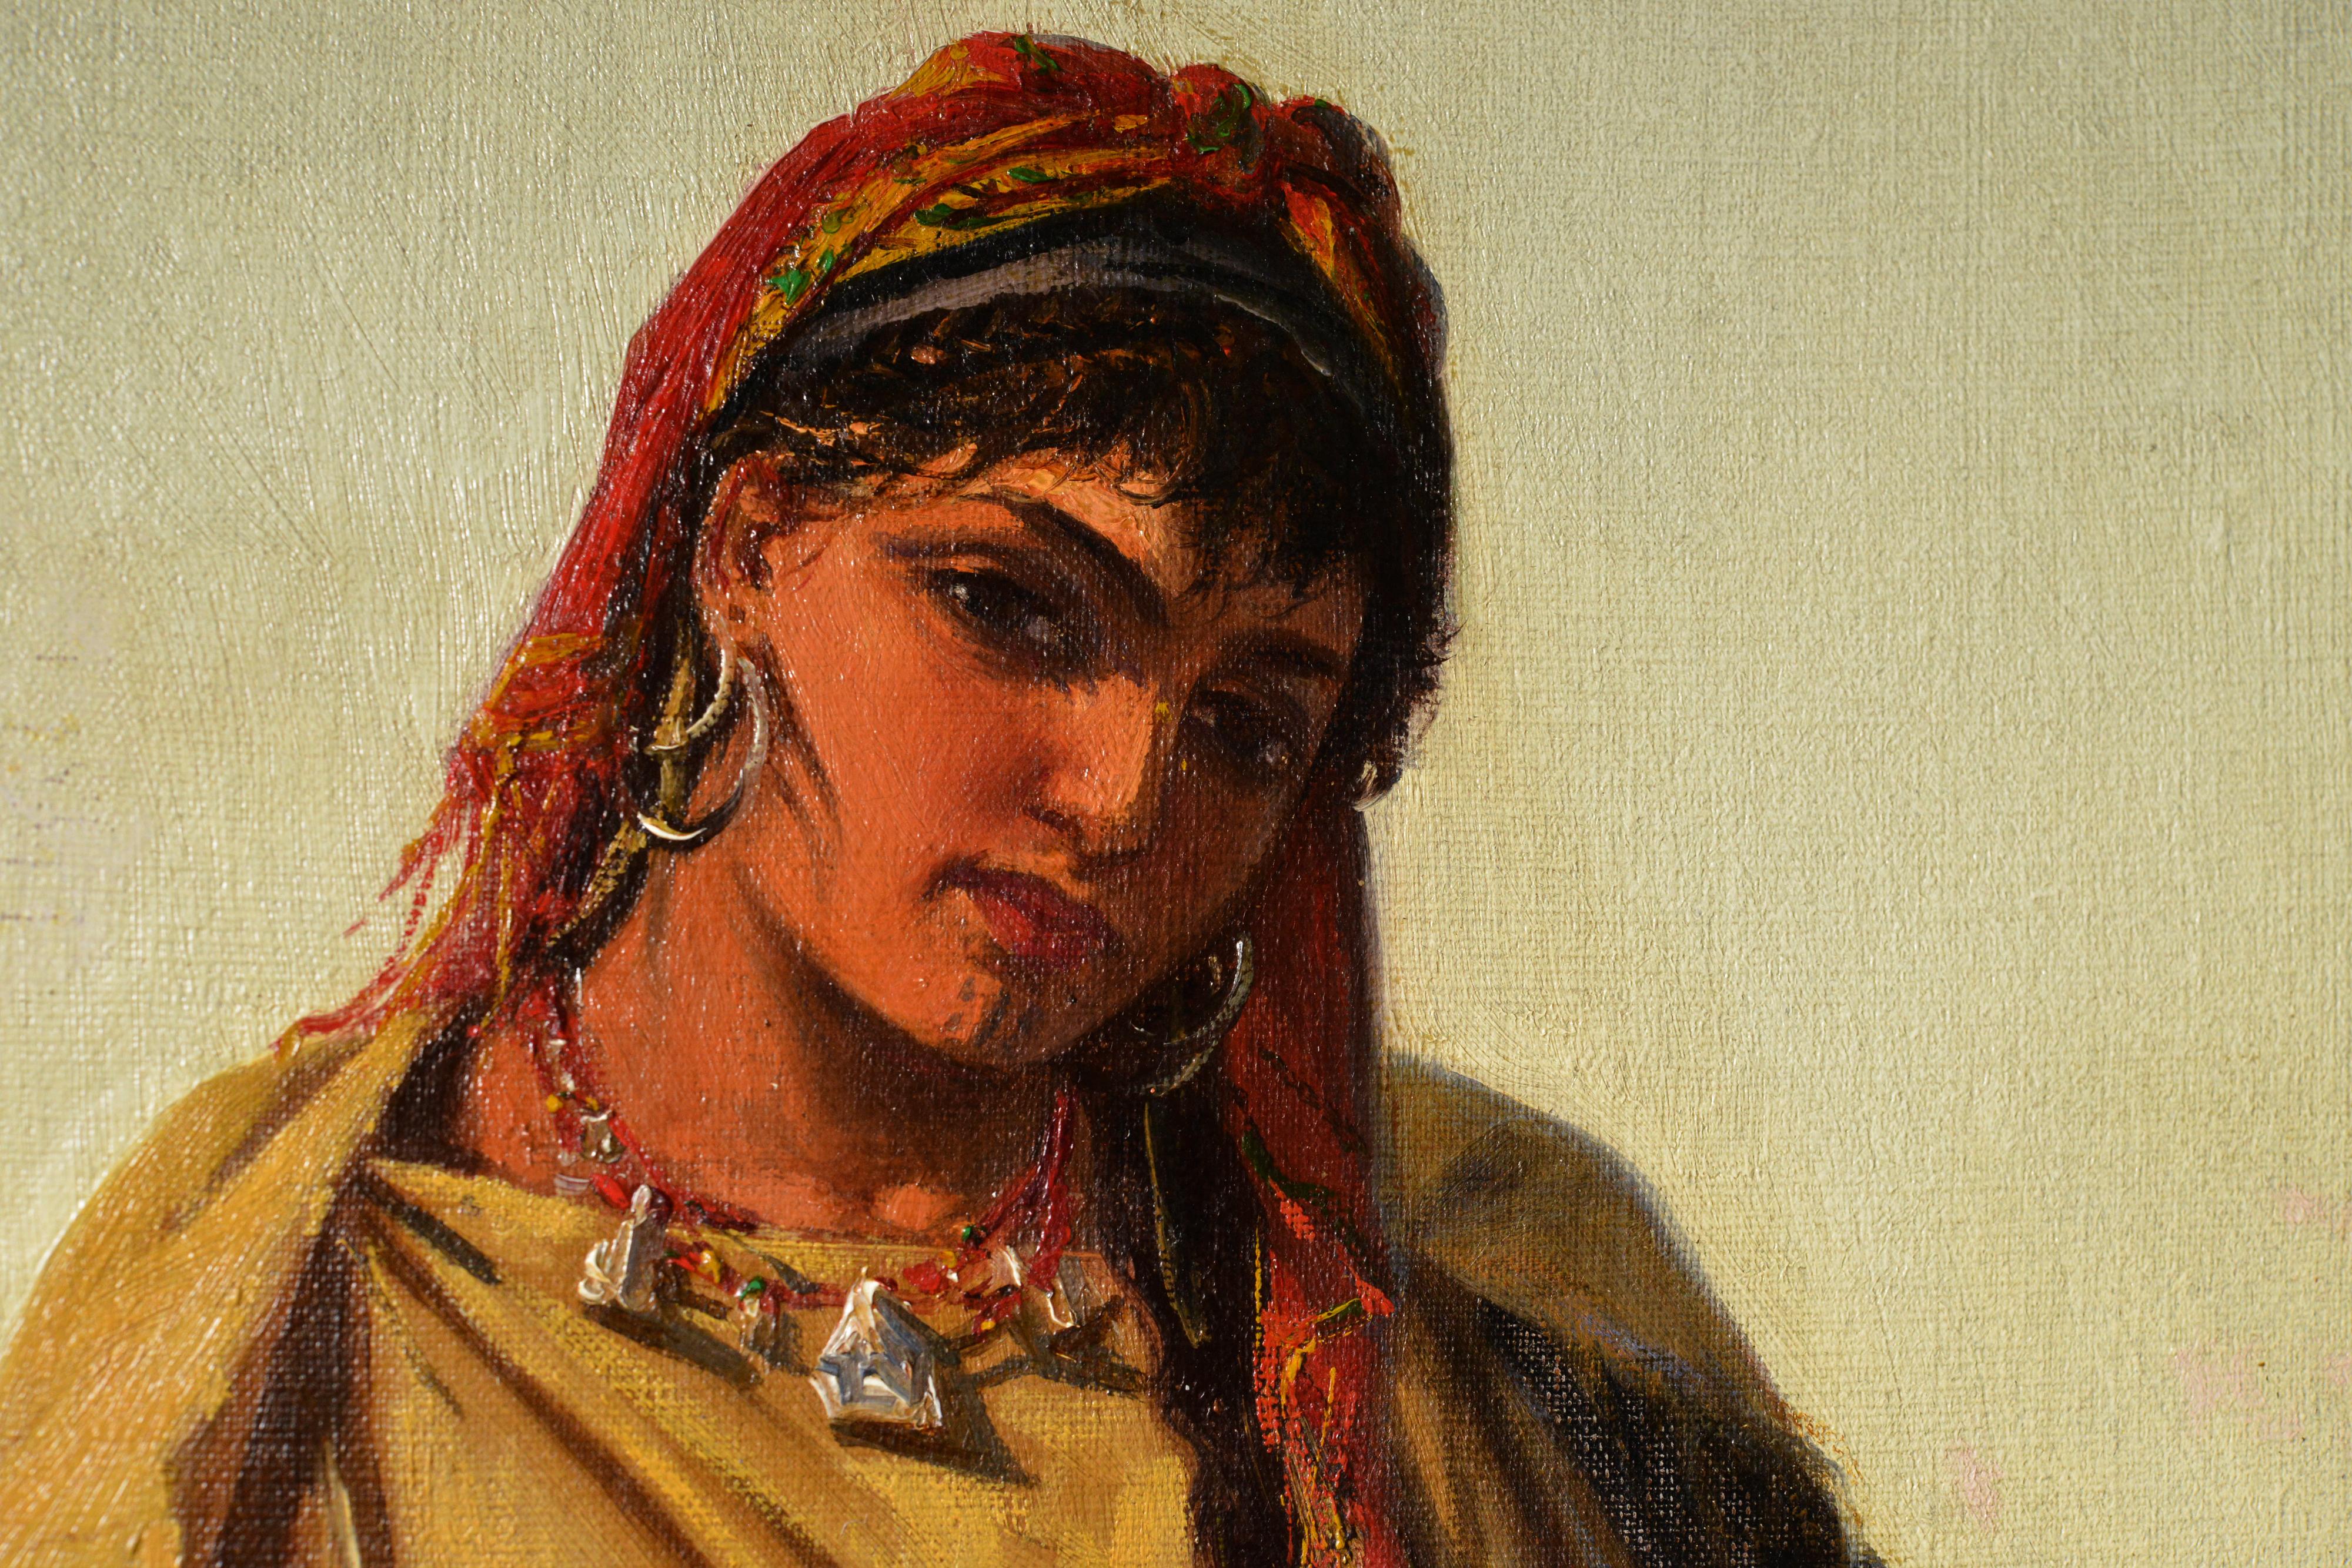 Bedouin girl posing for the painter in late sunlight (sunset). Was painted by Cavaliero Antonio Scognamiglio ca. 1870-1880, most likely in Cairo as similar work of smaller size was inscribed so by artist. His paintings witness him as a master of